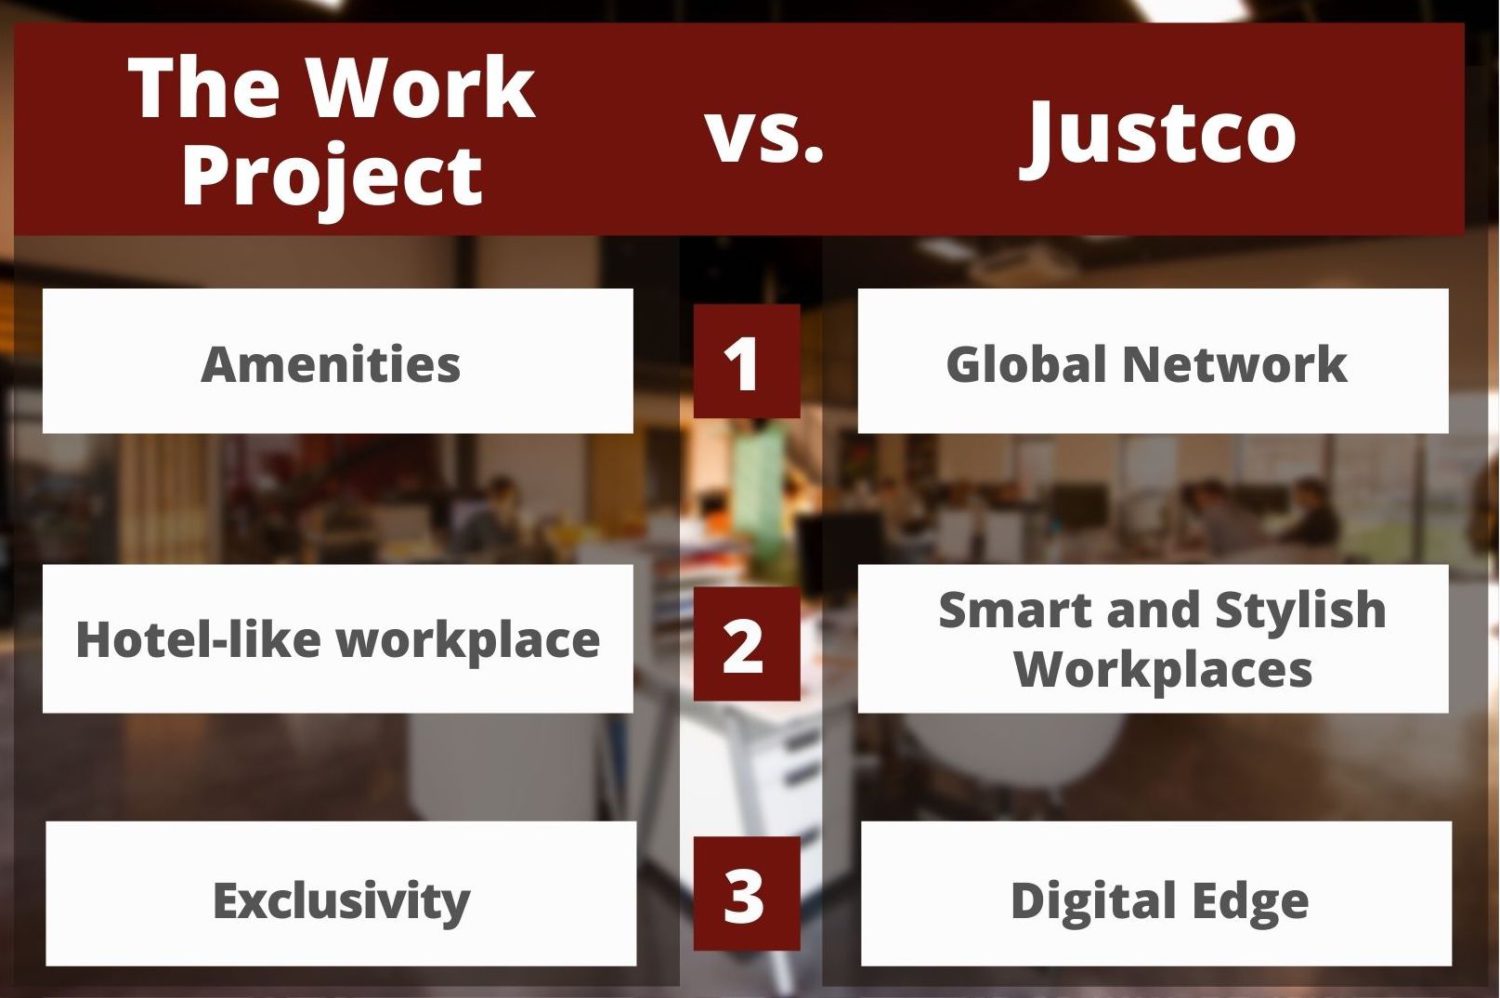 The Work Project vs Justco